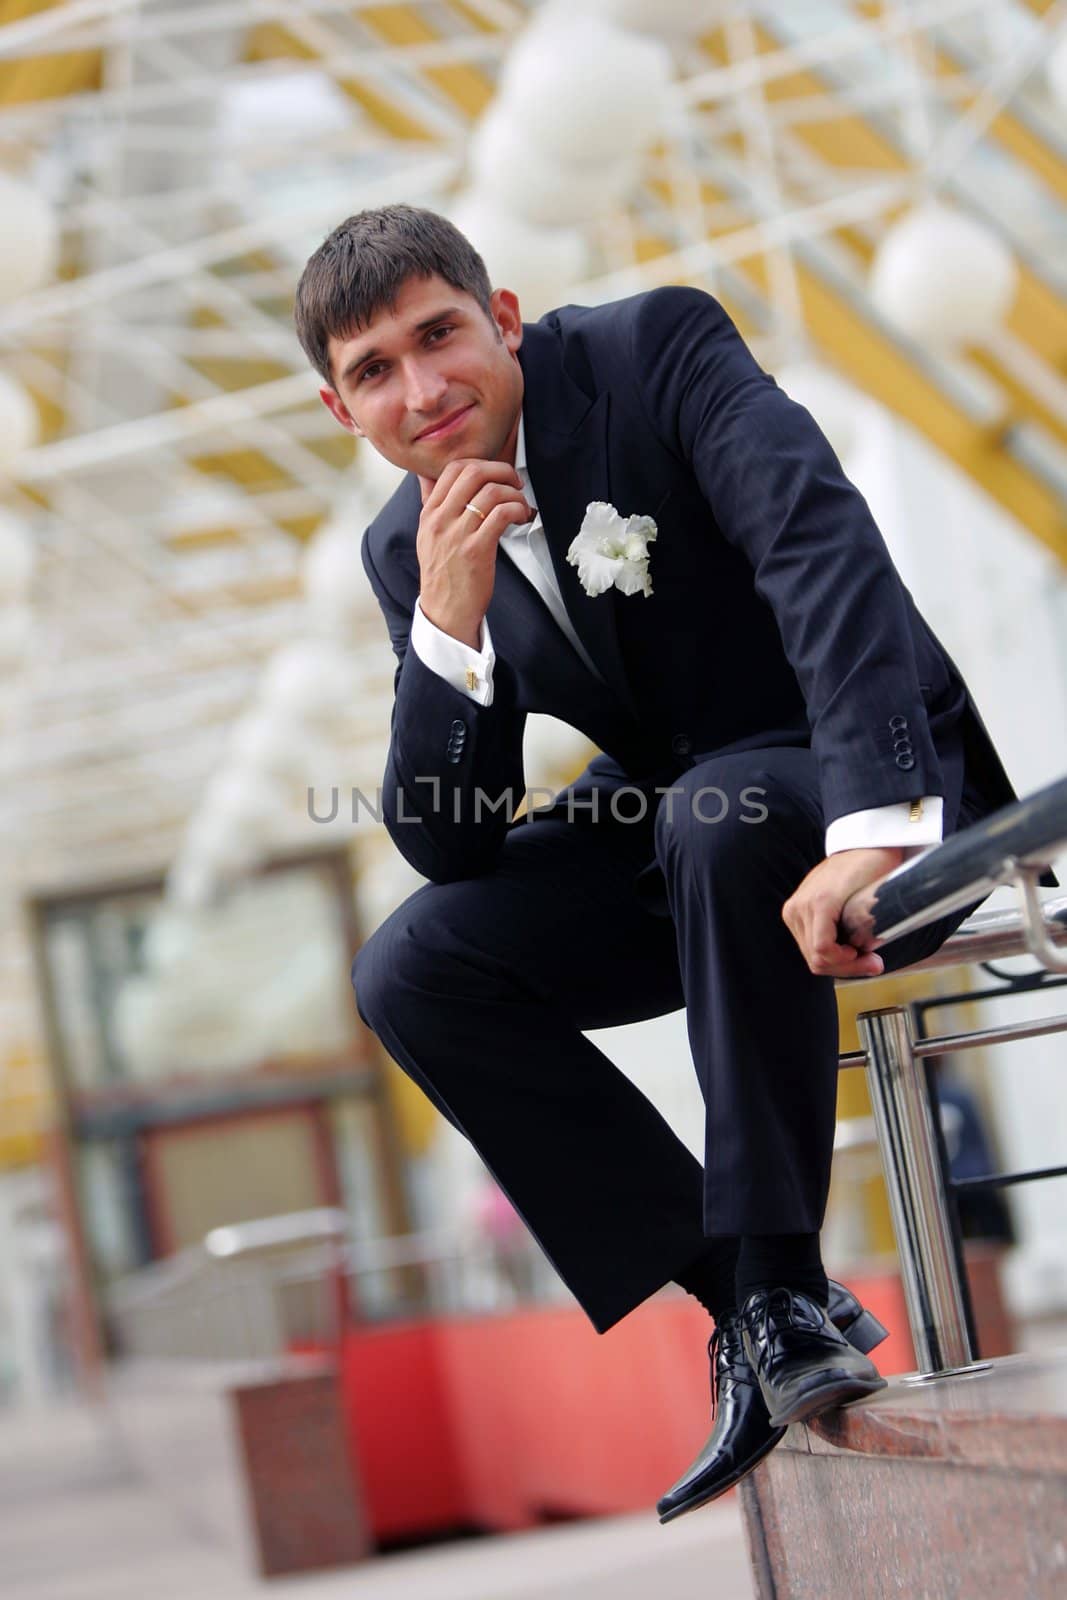 Full length portrait of handsome smiling young groom on wedding day.